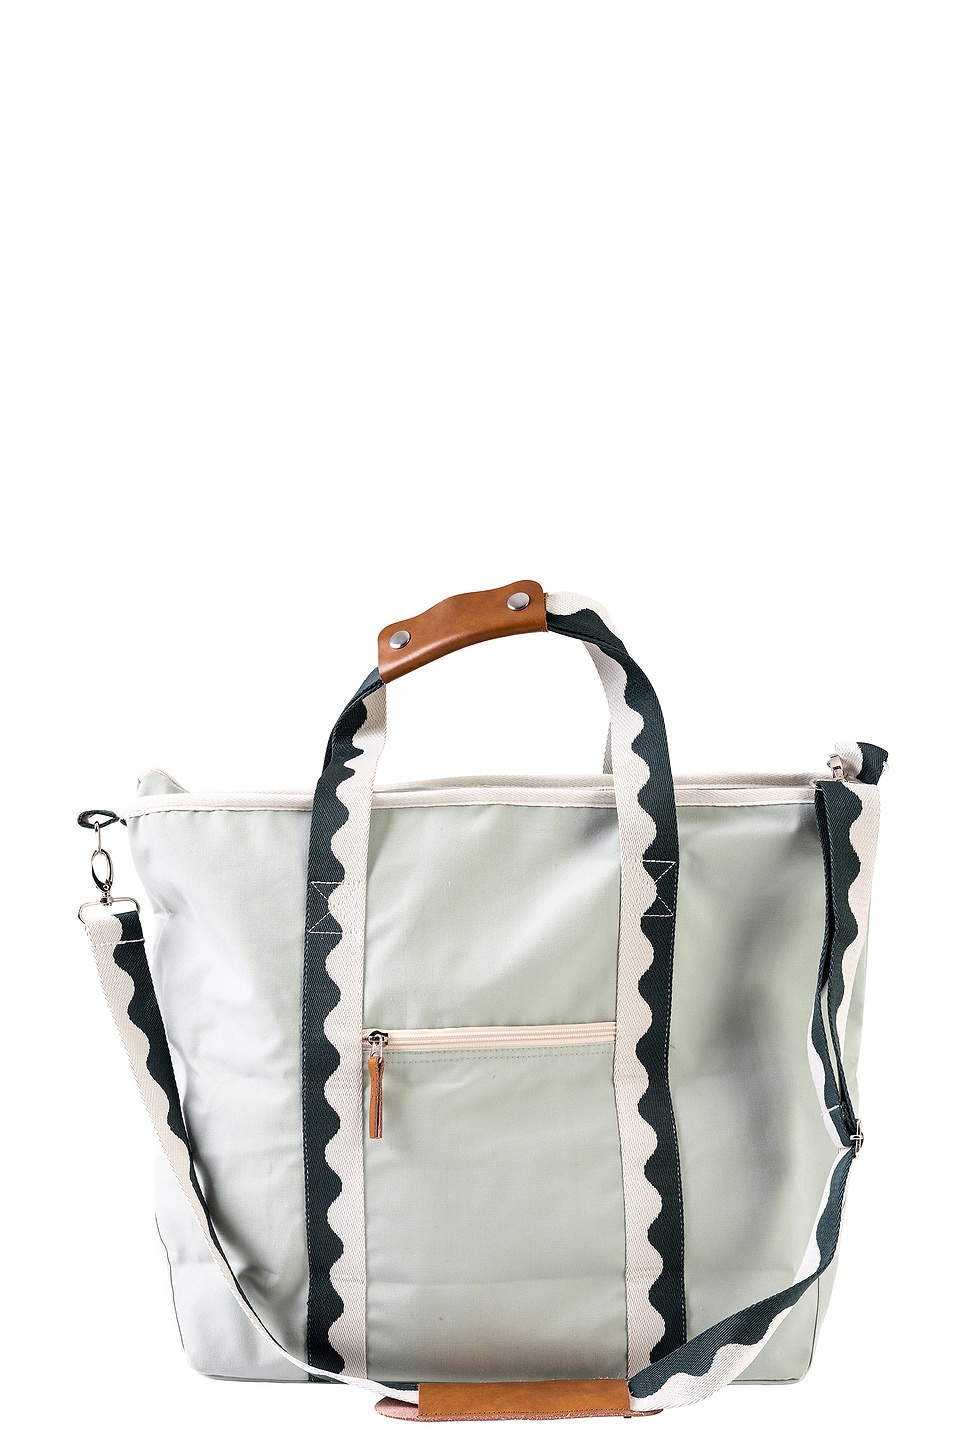 Image 1 of business & pleasure co. Cooler Tote Bag in Rivie Green